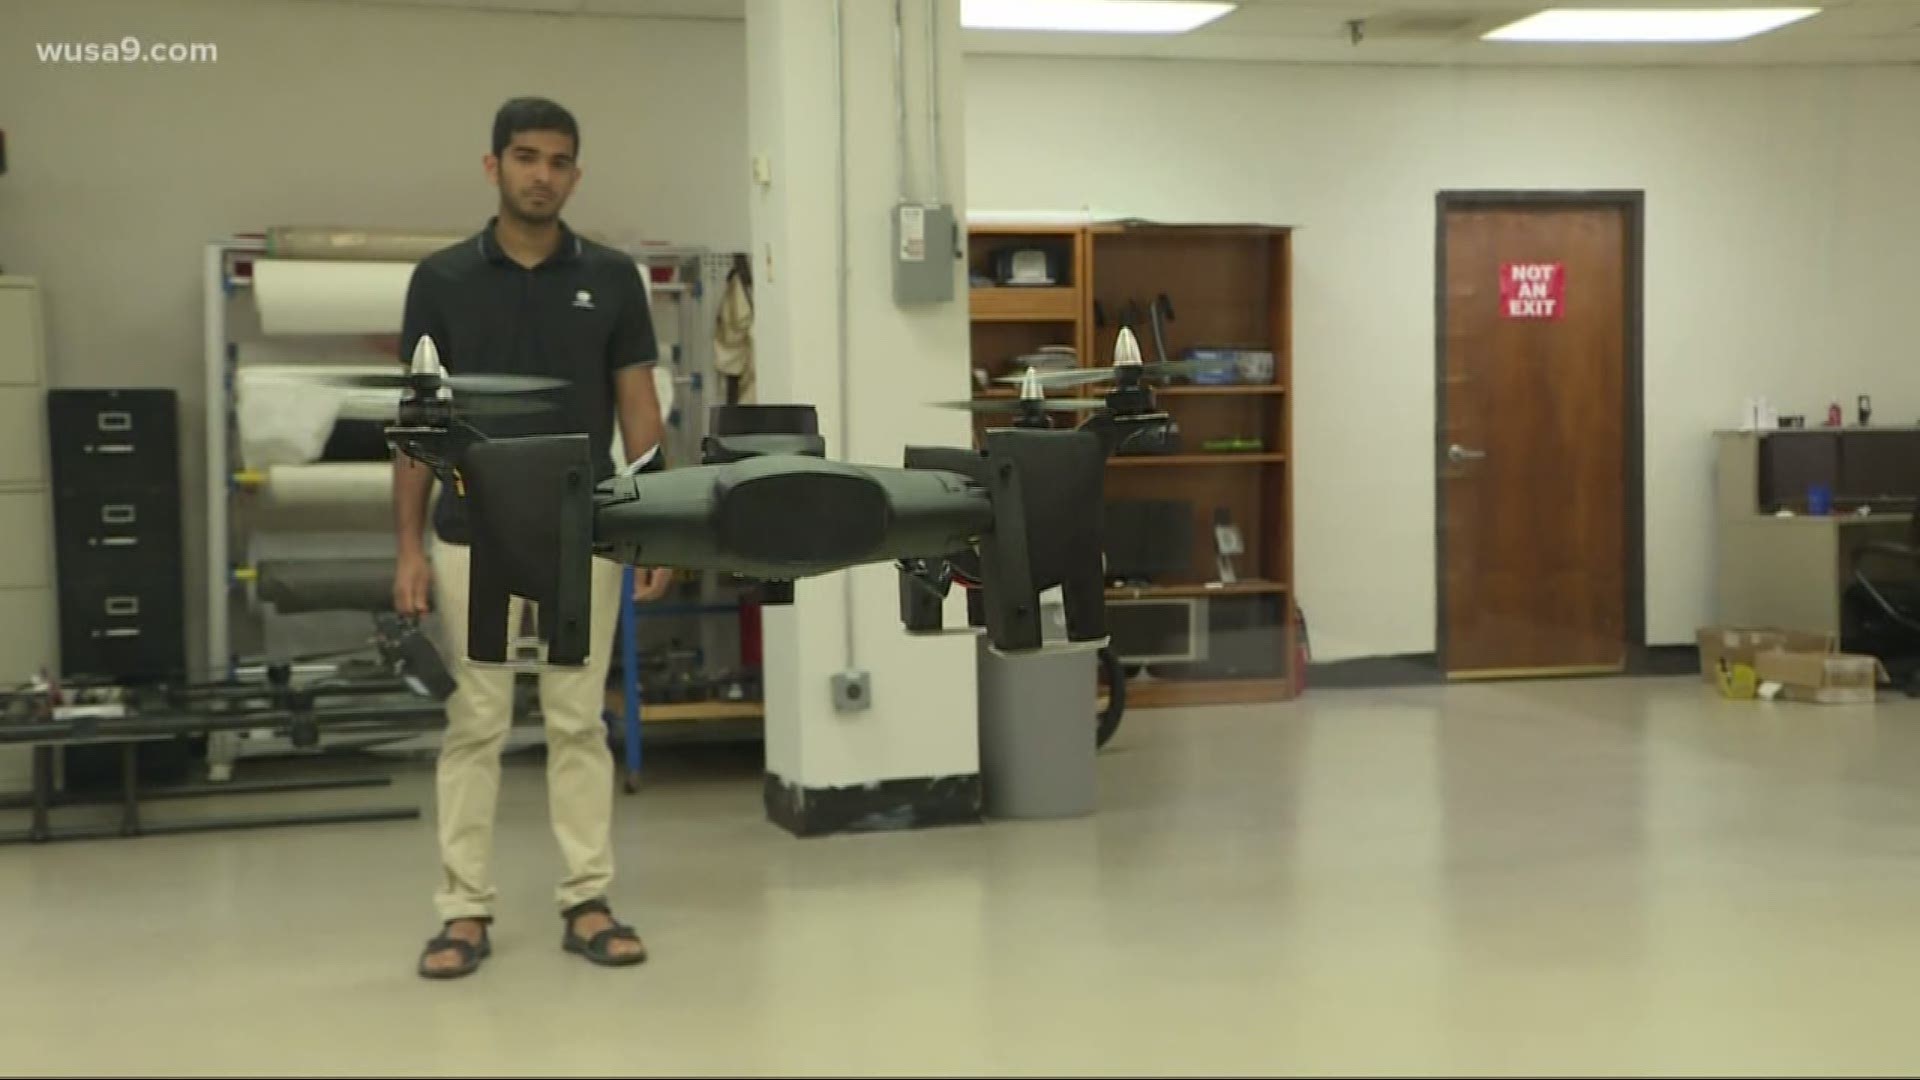 A company is developing a drone to help first responders if a terrorist strike or natural disaster happens.